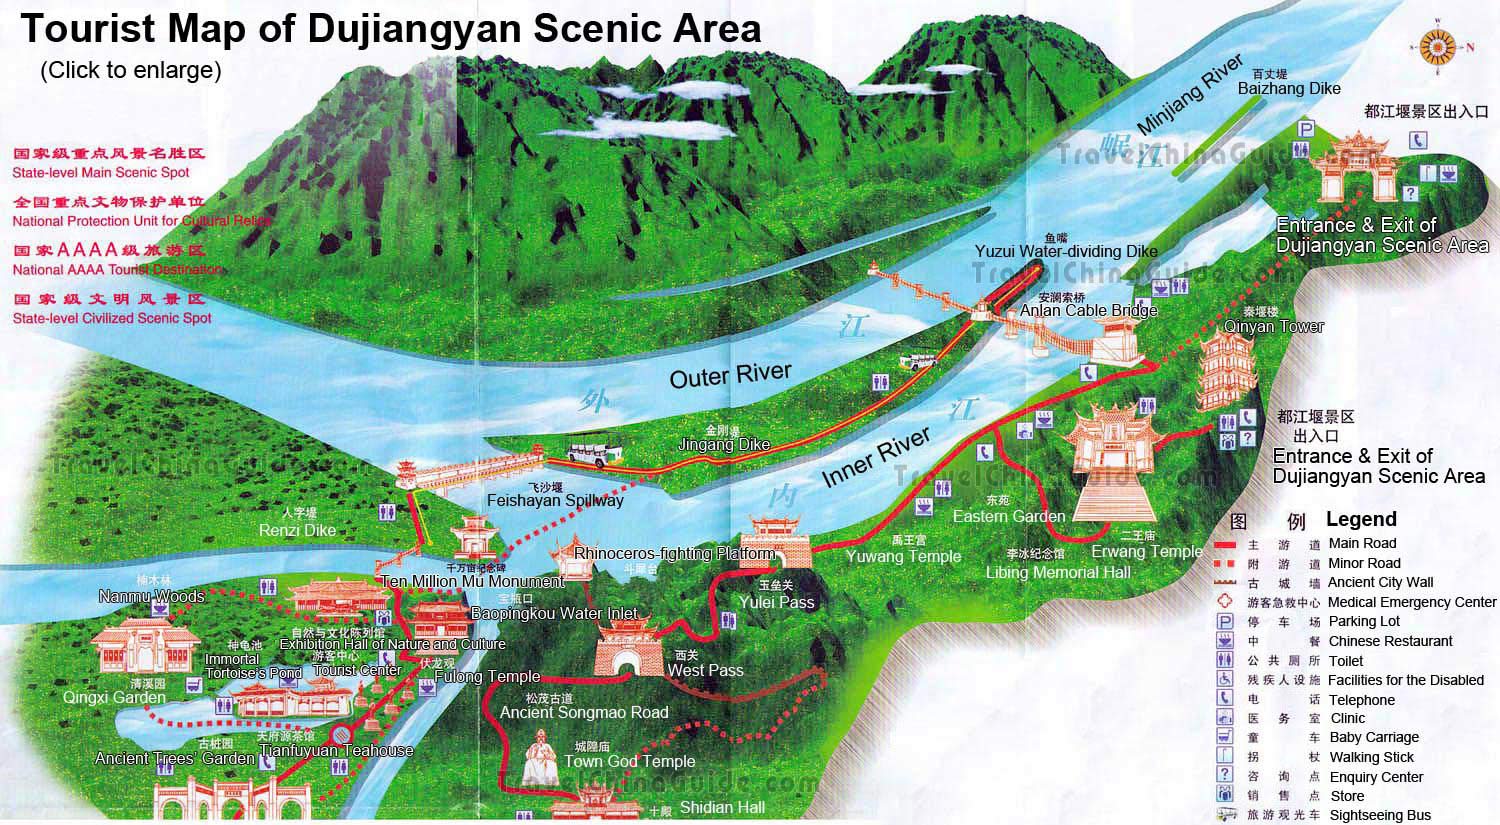 Sichuan Maps: Cities, Attractions, Streets